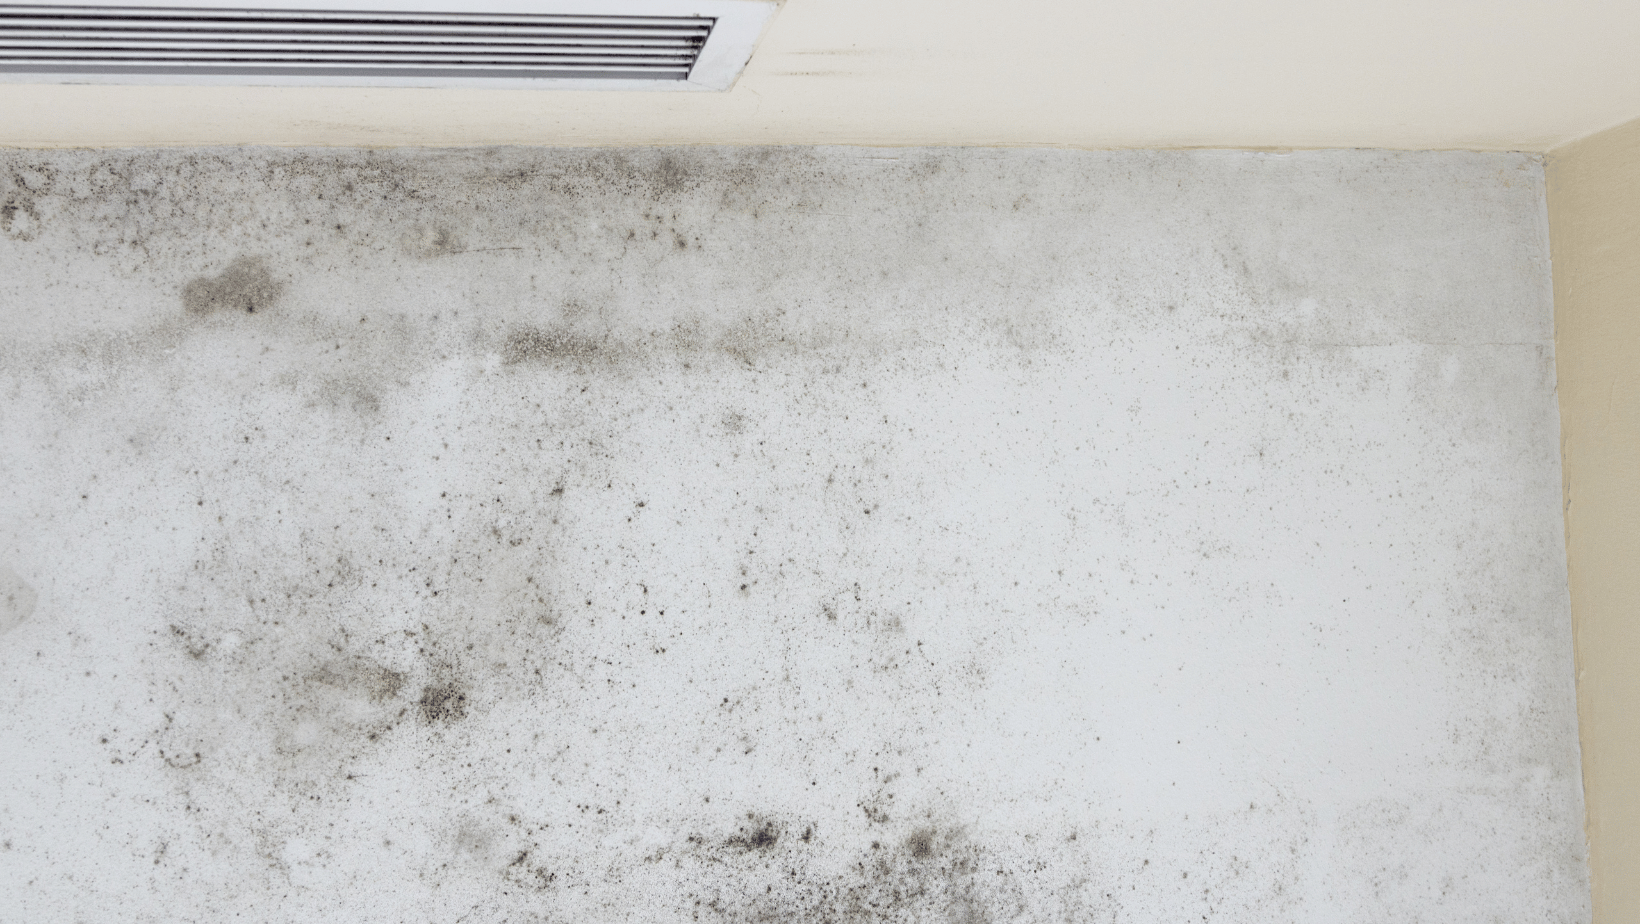 Practical Tips for Preventing Mold in Humid Climates